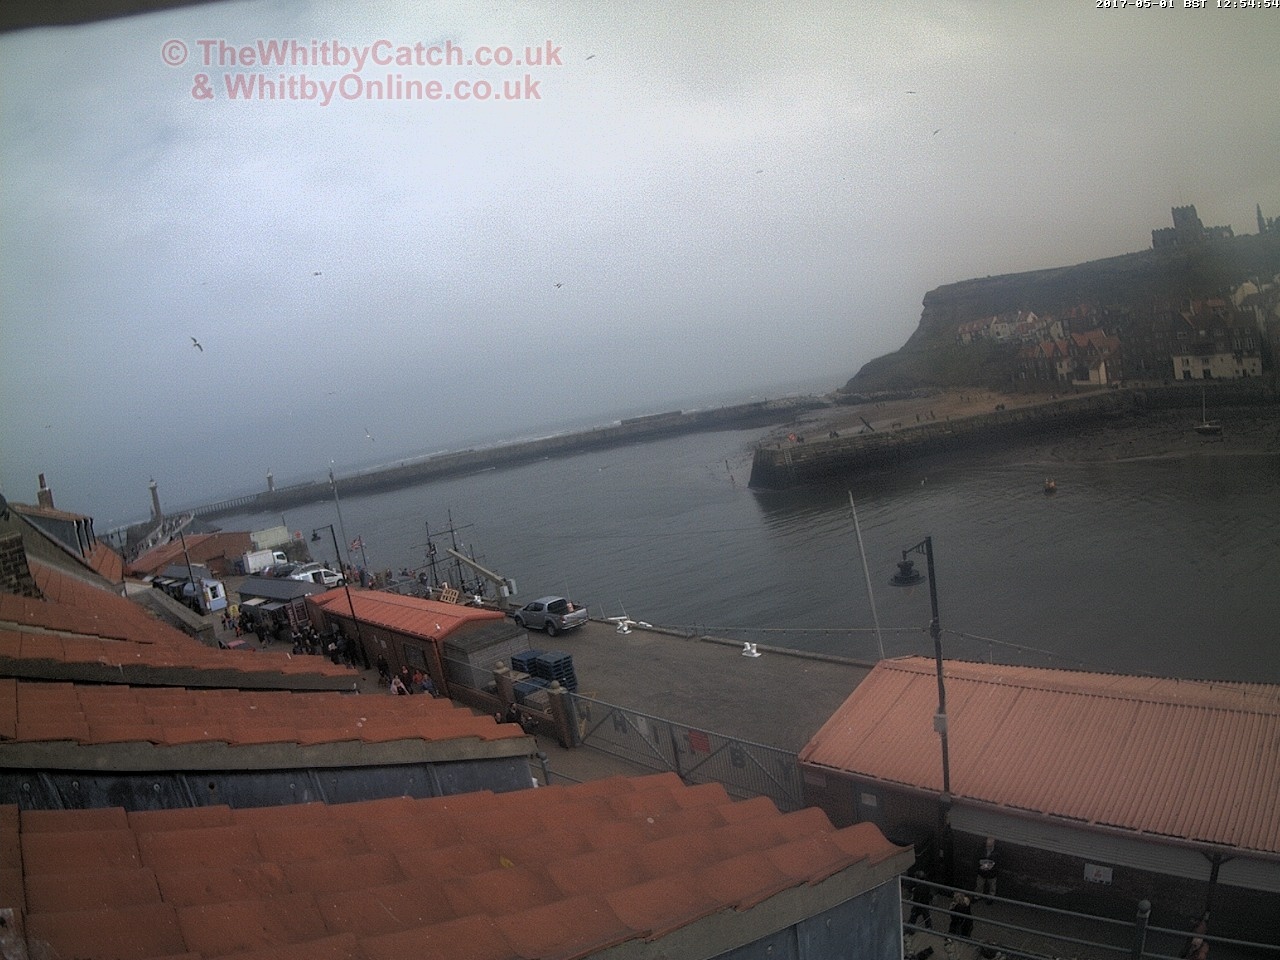 Whitby Mon 1st May 2017 12:55.